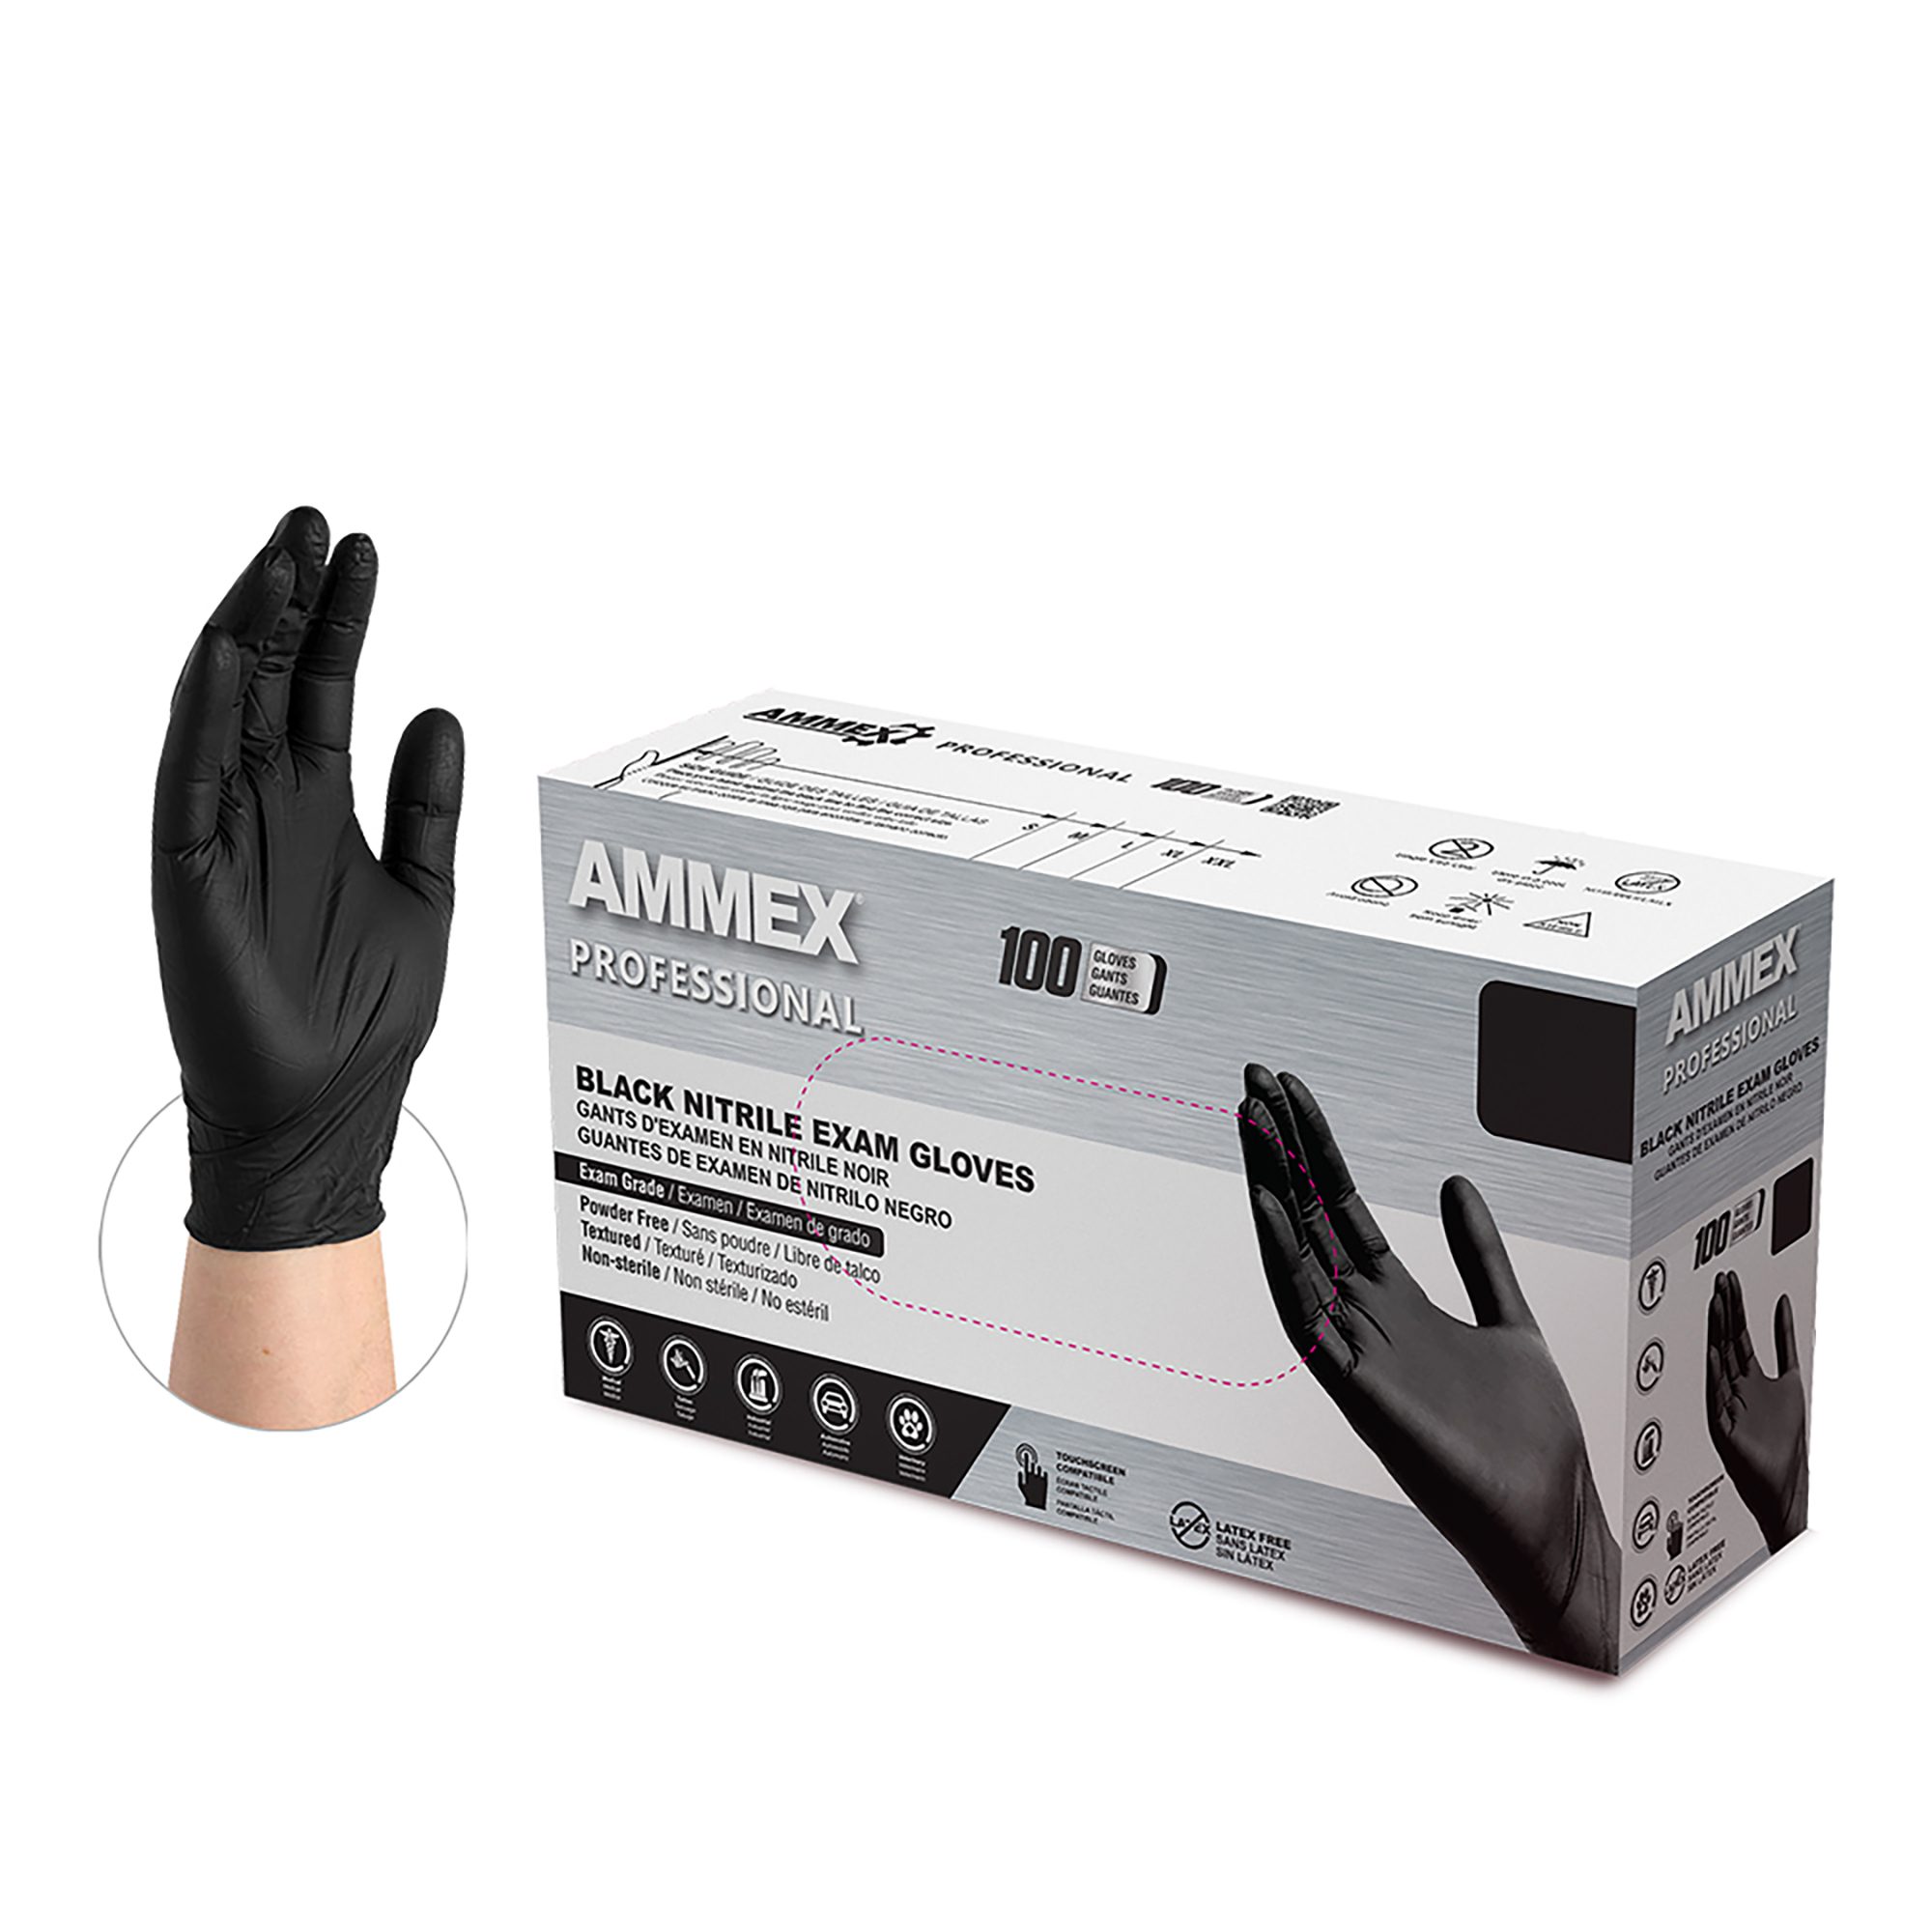 Black Nitrile Gloves, Powder Free Products, Supplies and Equipment